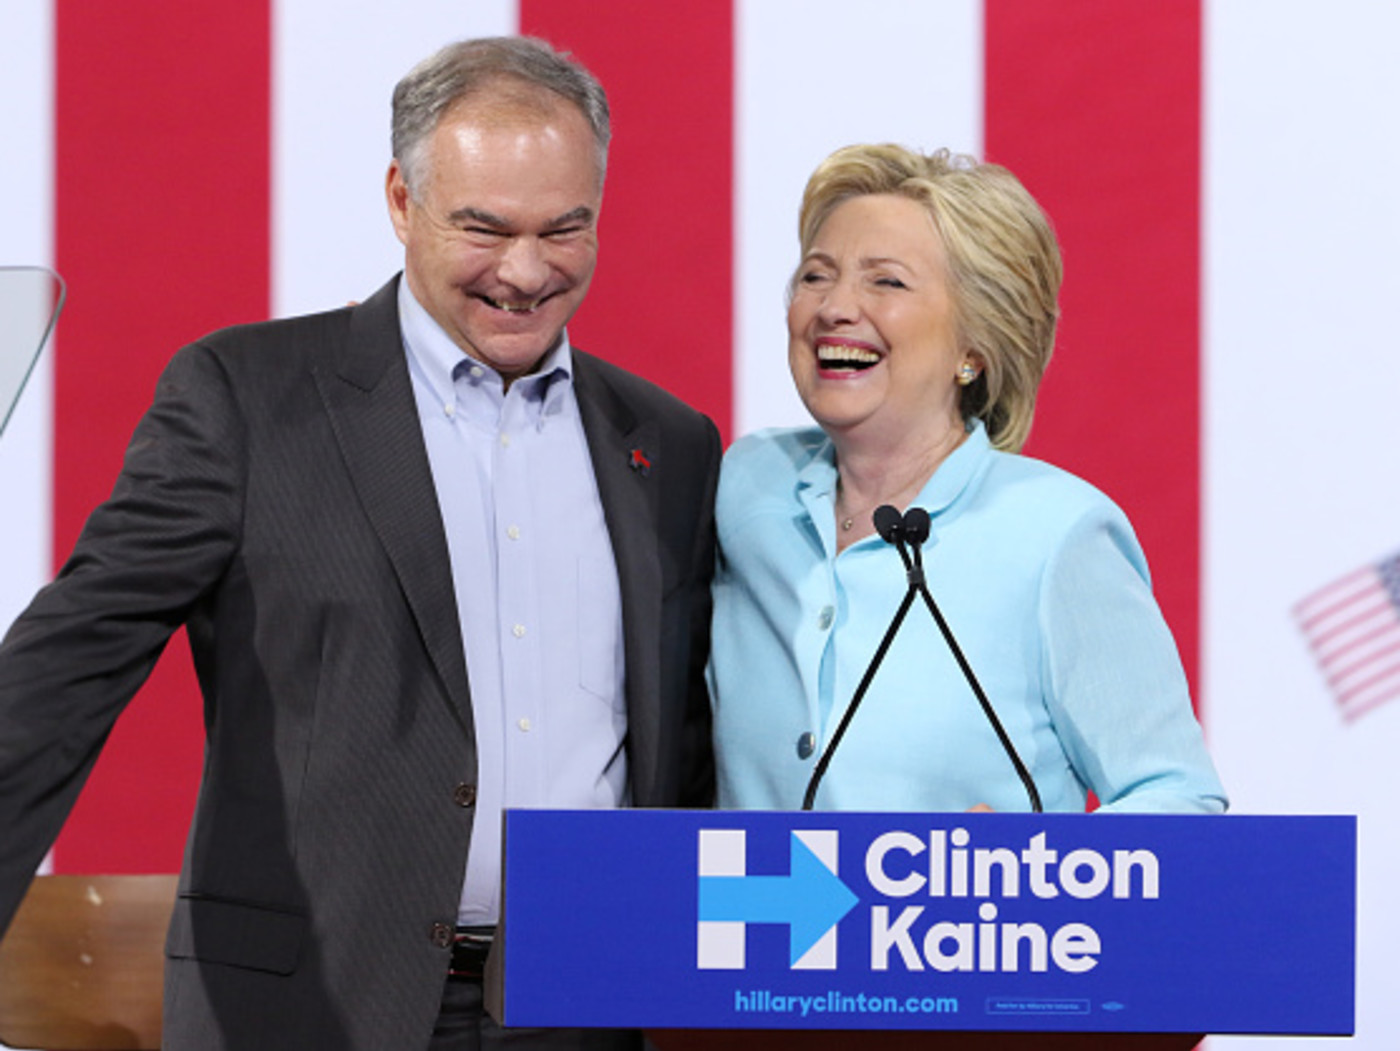 gammelklog Installere Advarsel Hillary Clinton Knows You Think Tim Kaine Is a “Safe” Vice President |  Complex